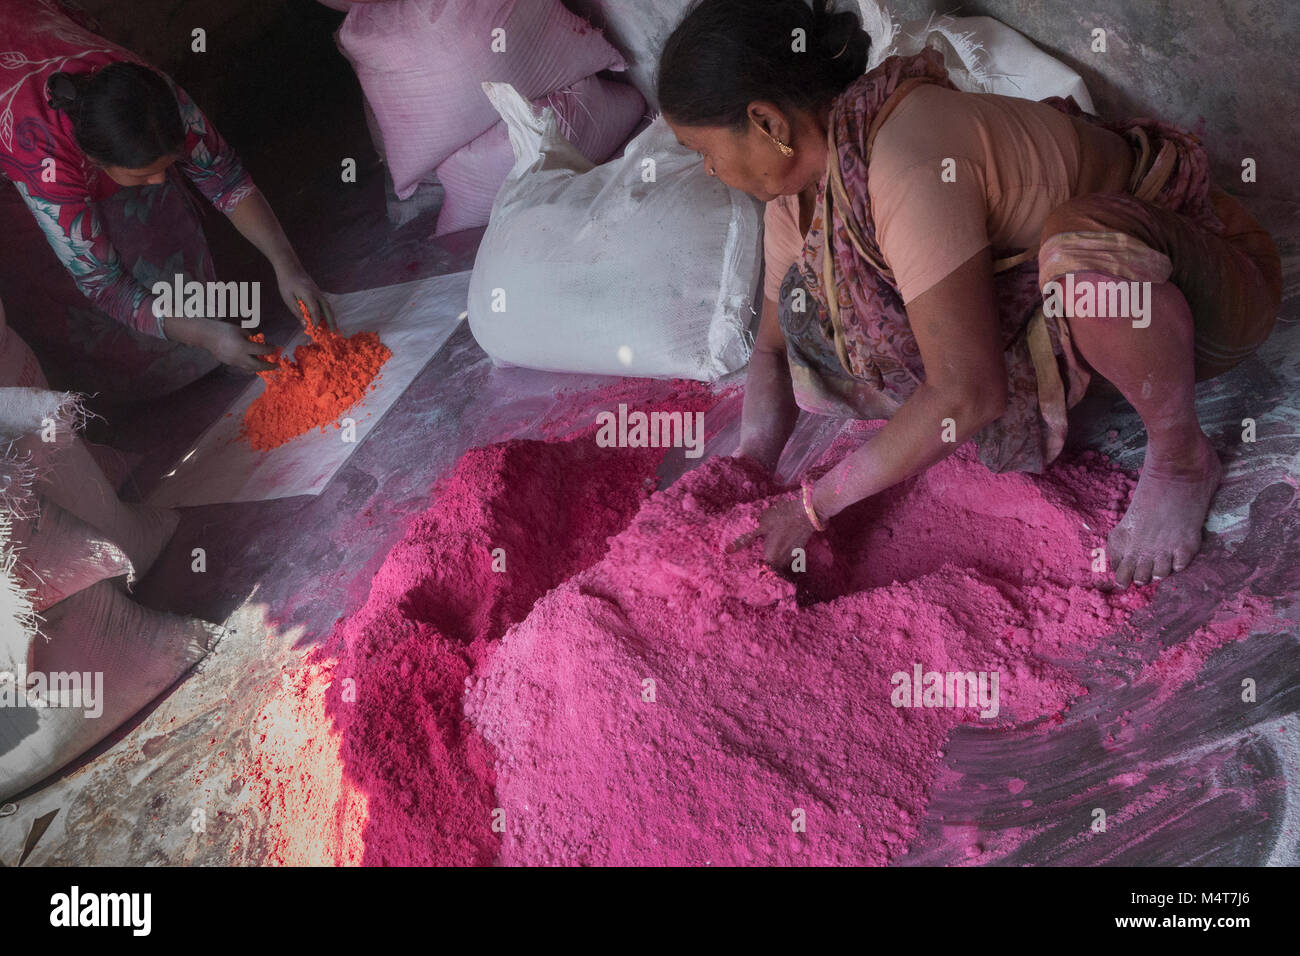 Kolkata, India. 17th Feb, 2018. Indian women prepare gulal or colored powder, which will be used for the upcoming Holi Festival, at Uttar Chara village, some 110 km away from Kolkata, India, on Feb. 17, 2018. Holi Festival, also known as Spring Festival of Colors, usually falls in the later part of February or March, and it is celebrated by Hindu residents around the world by throwing gulal at each other. Credit: Tumpa Mondal/Xinhua/Alamy Live News Stock Photo